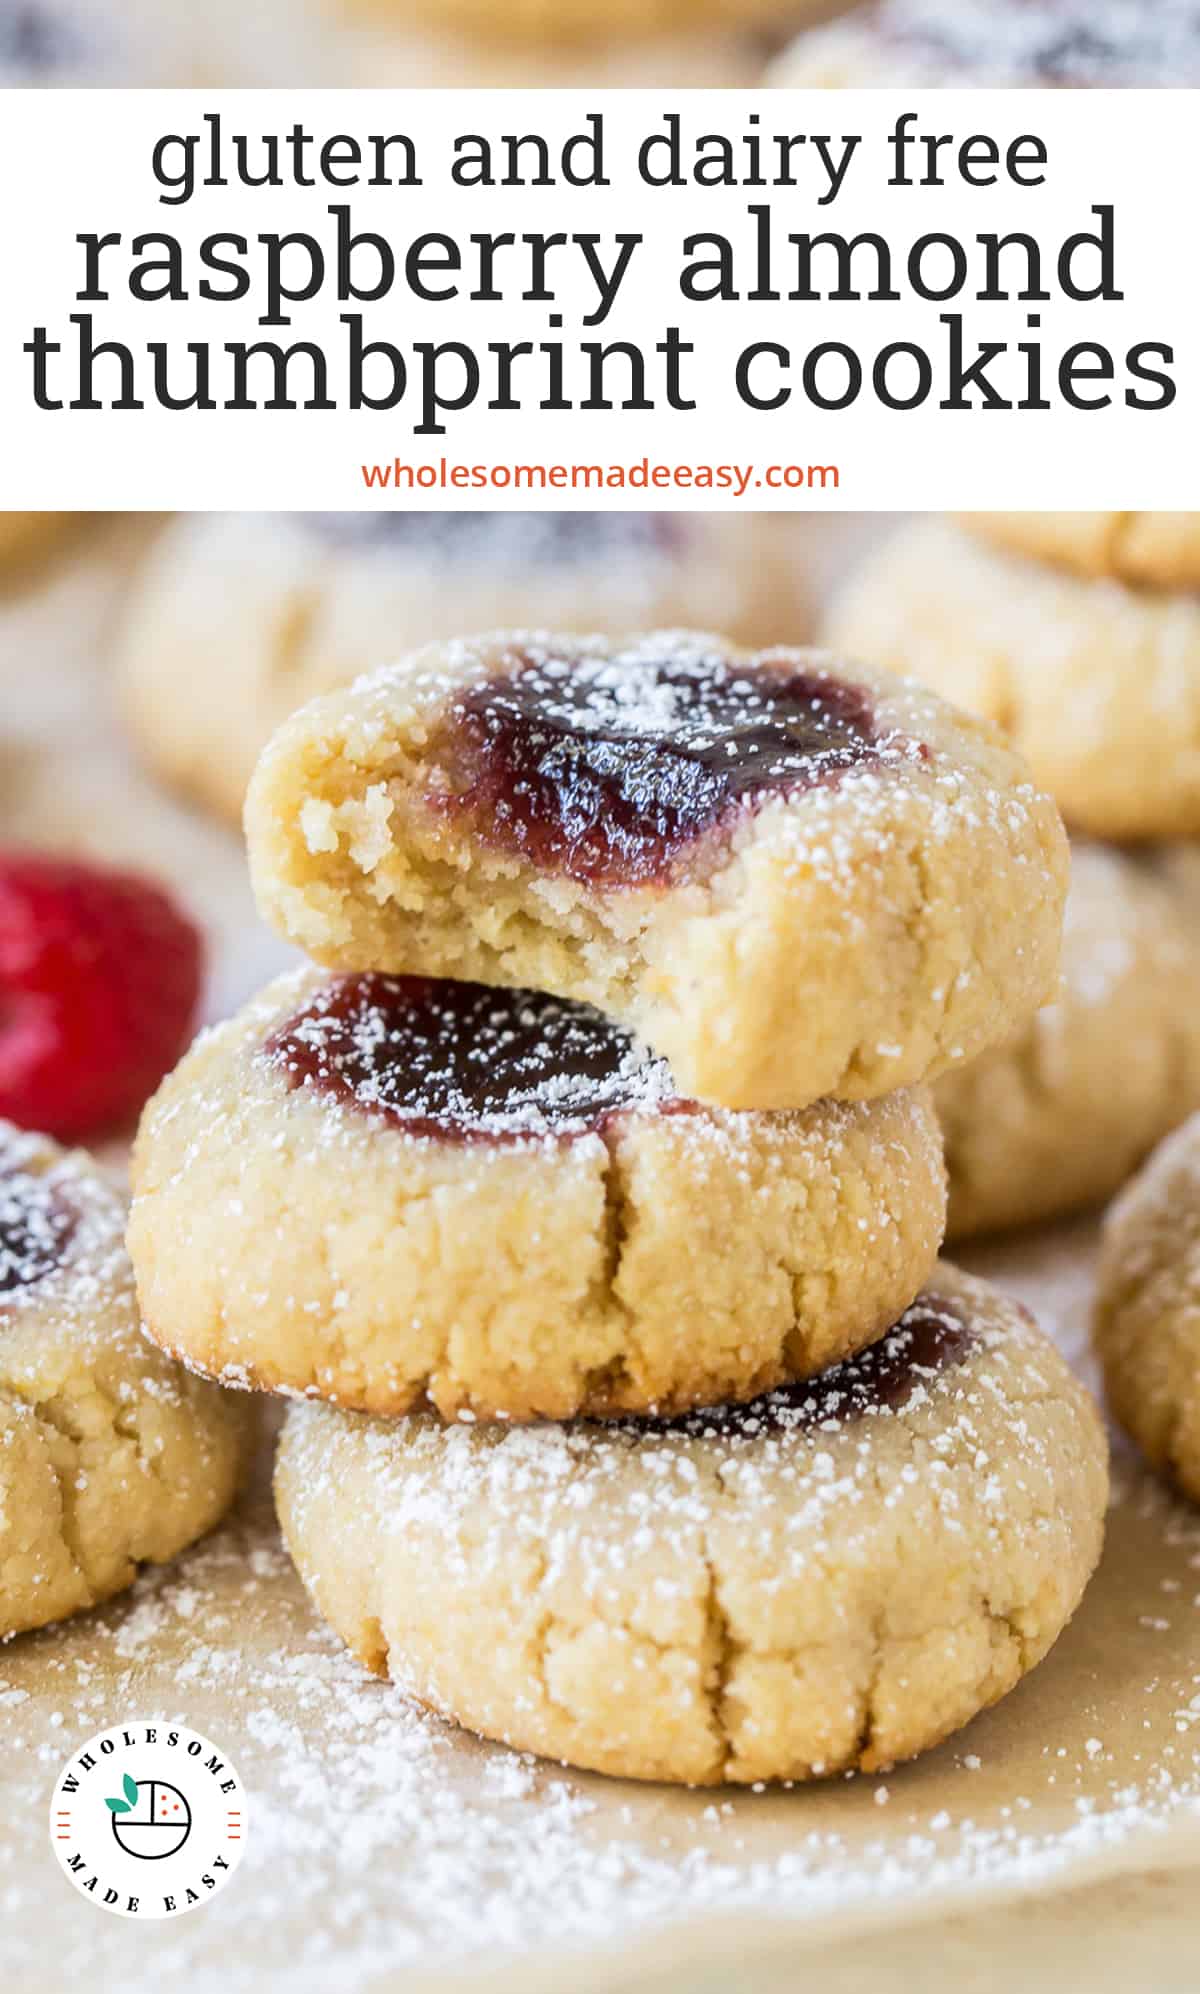 A stack of Raspberry Almond Thumbprint Cookies with text overlay.